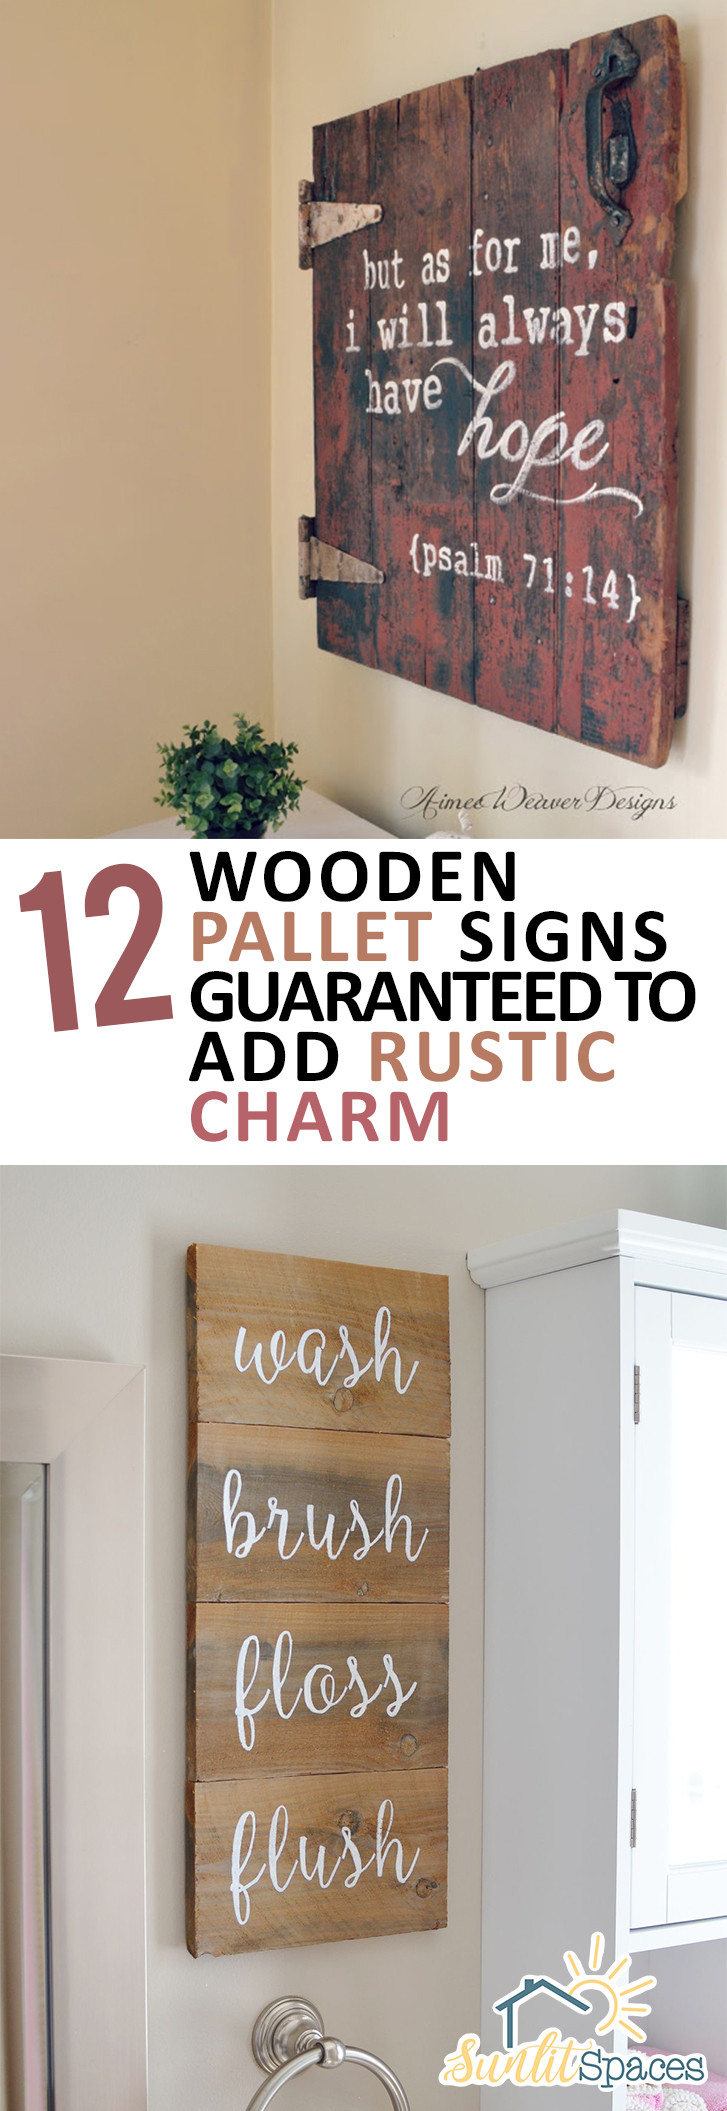 DIY Wooden Signs
 12 Wooden Pallet Signs Guaranteed to Add Rustic Charm